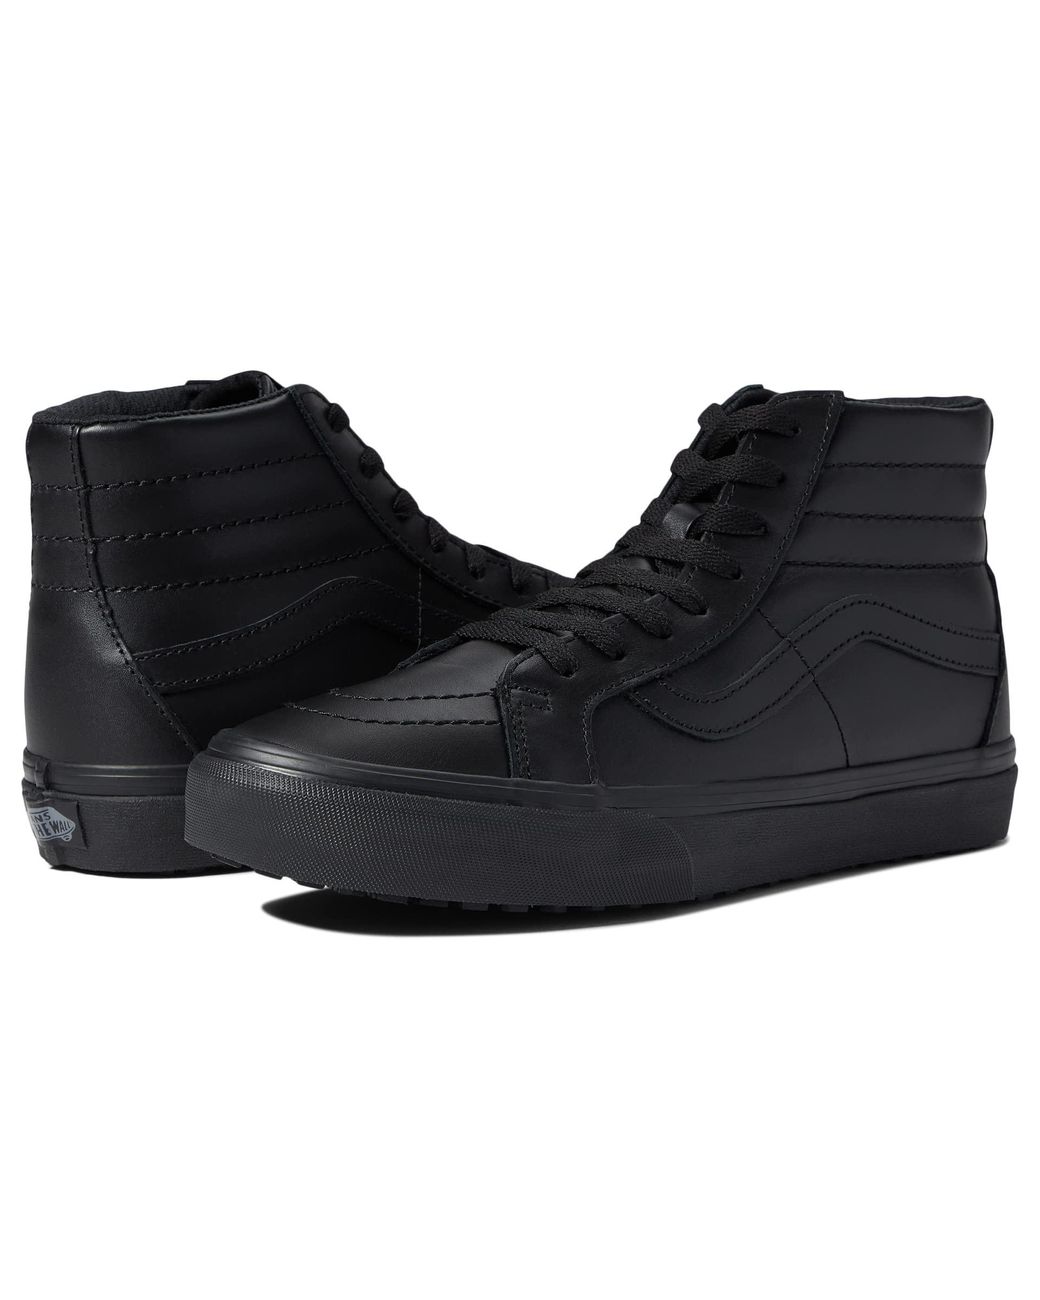 Vans Made For The Makers Sk8-hi Reissue Uc in Black | Lyst